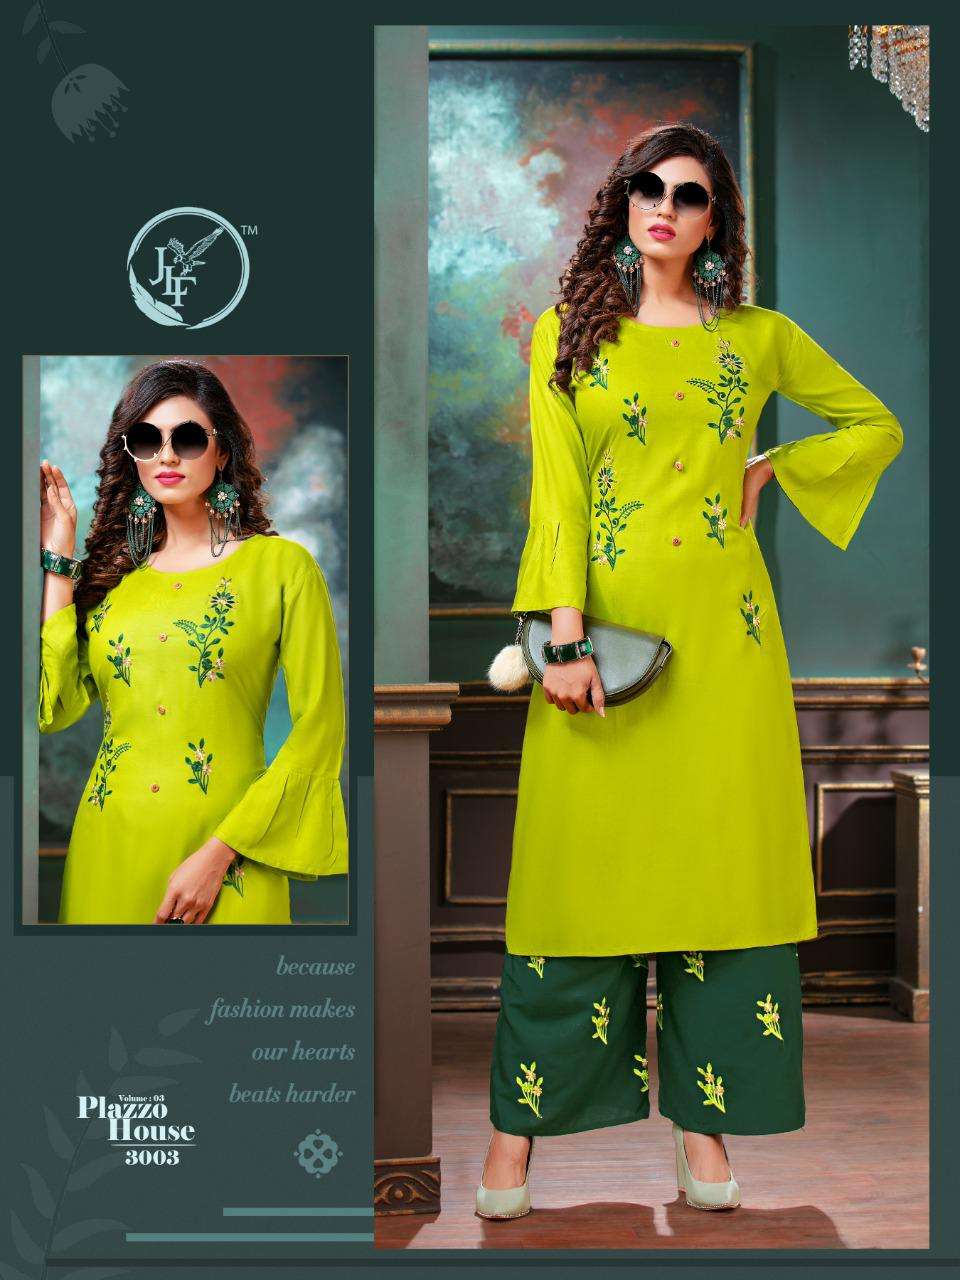 PLAZZO HOUSE VOL-3 BY JLF 3001 TO 3008 SERIES STYLISH FANCY BEAUTIFUL COLORFUL CASUAL WEAR & ETHNIC WEAR HEAVY RAYON EMBROIDERED KURTIS WITH BOTTOM AT WHOLESALE PRICE